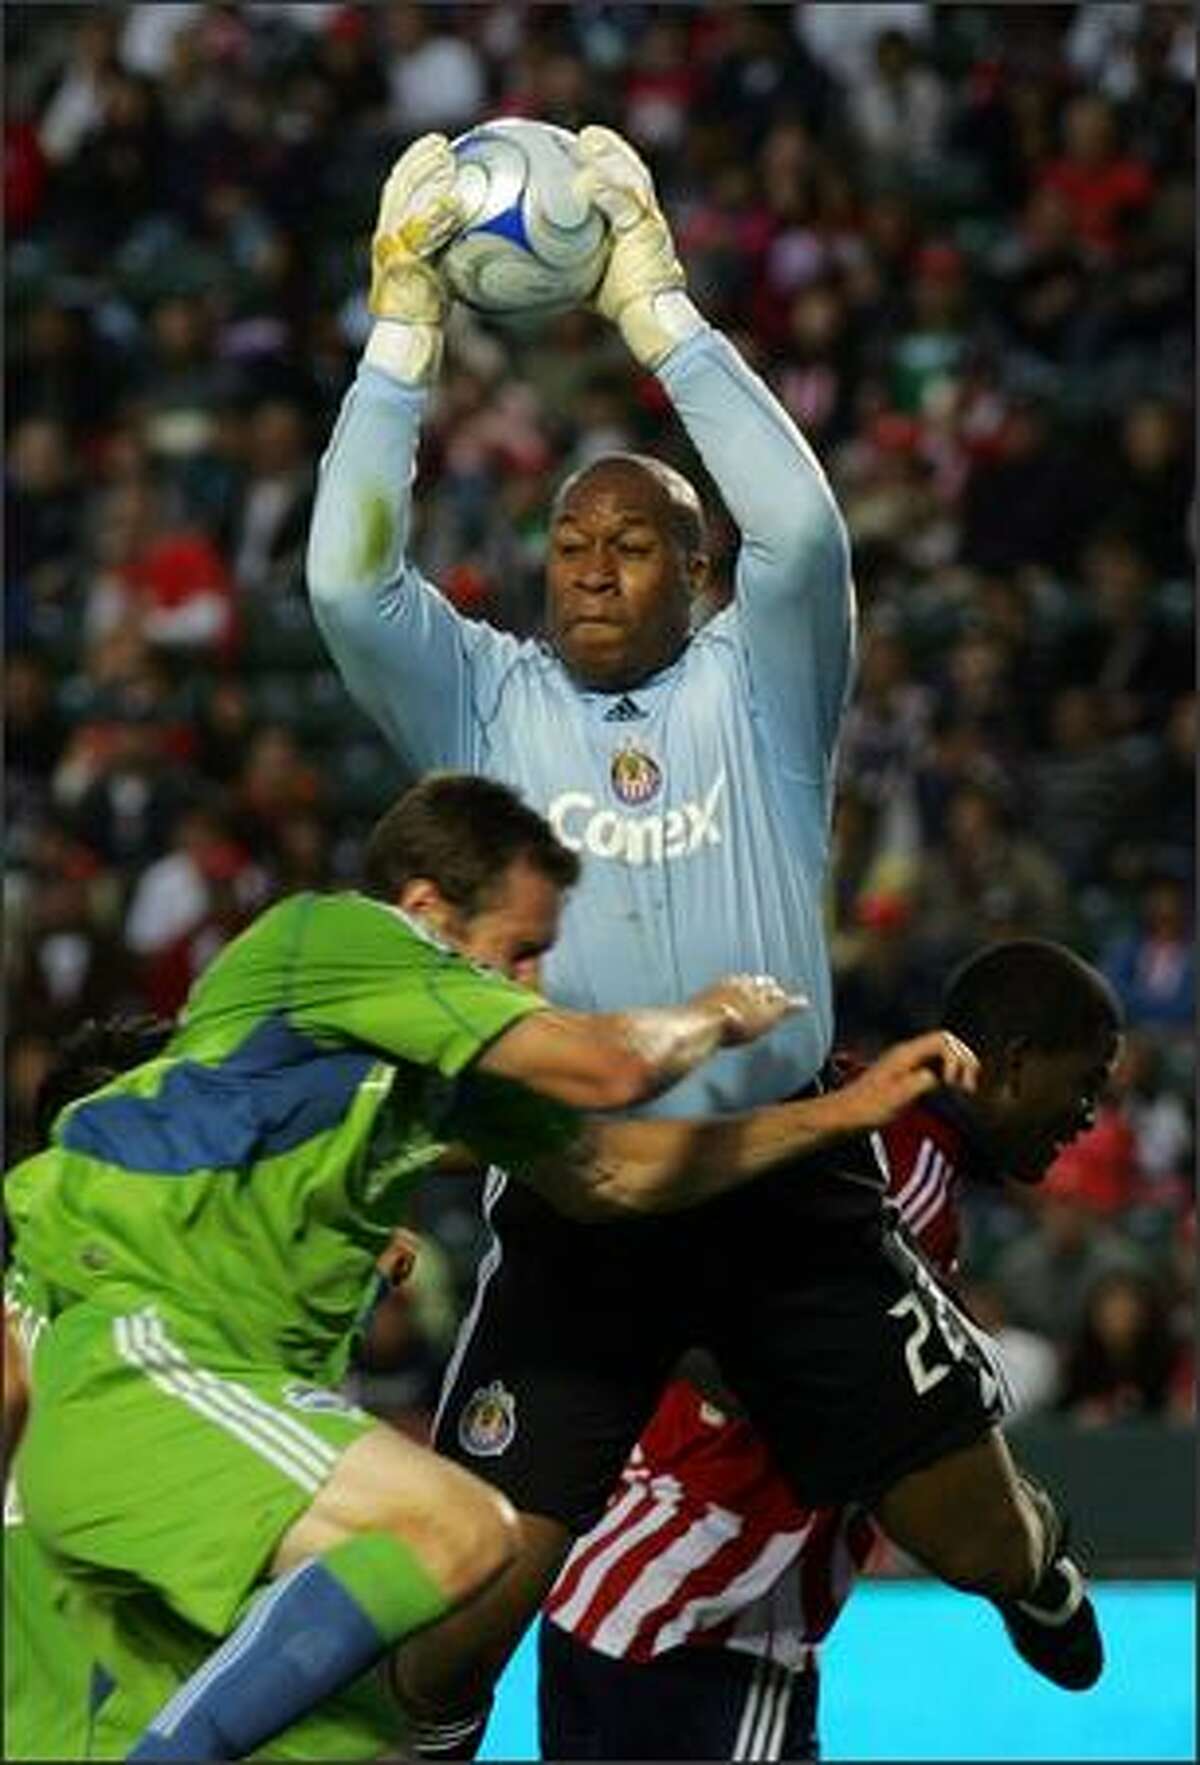 Goalkeeper Zach Thornton of Chivas USA makes a save in front of Nate Jaqua of Seattle Sounders FC on a corner kick in the first half.